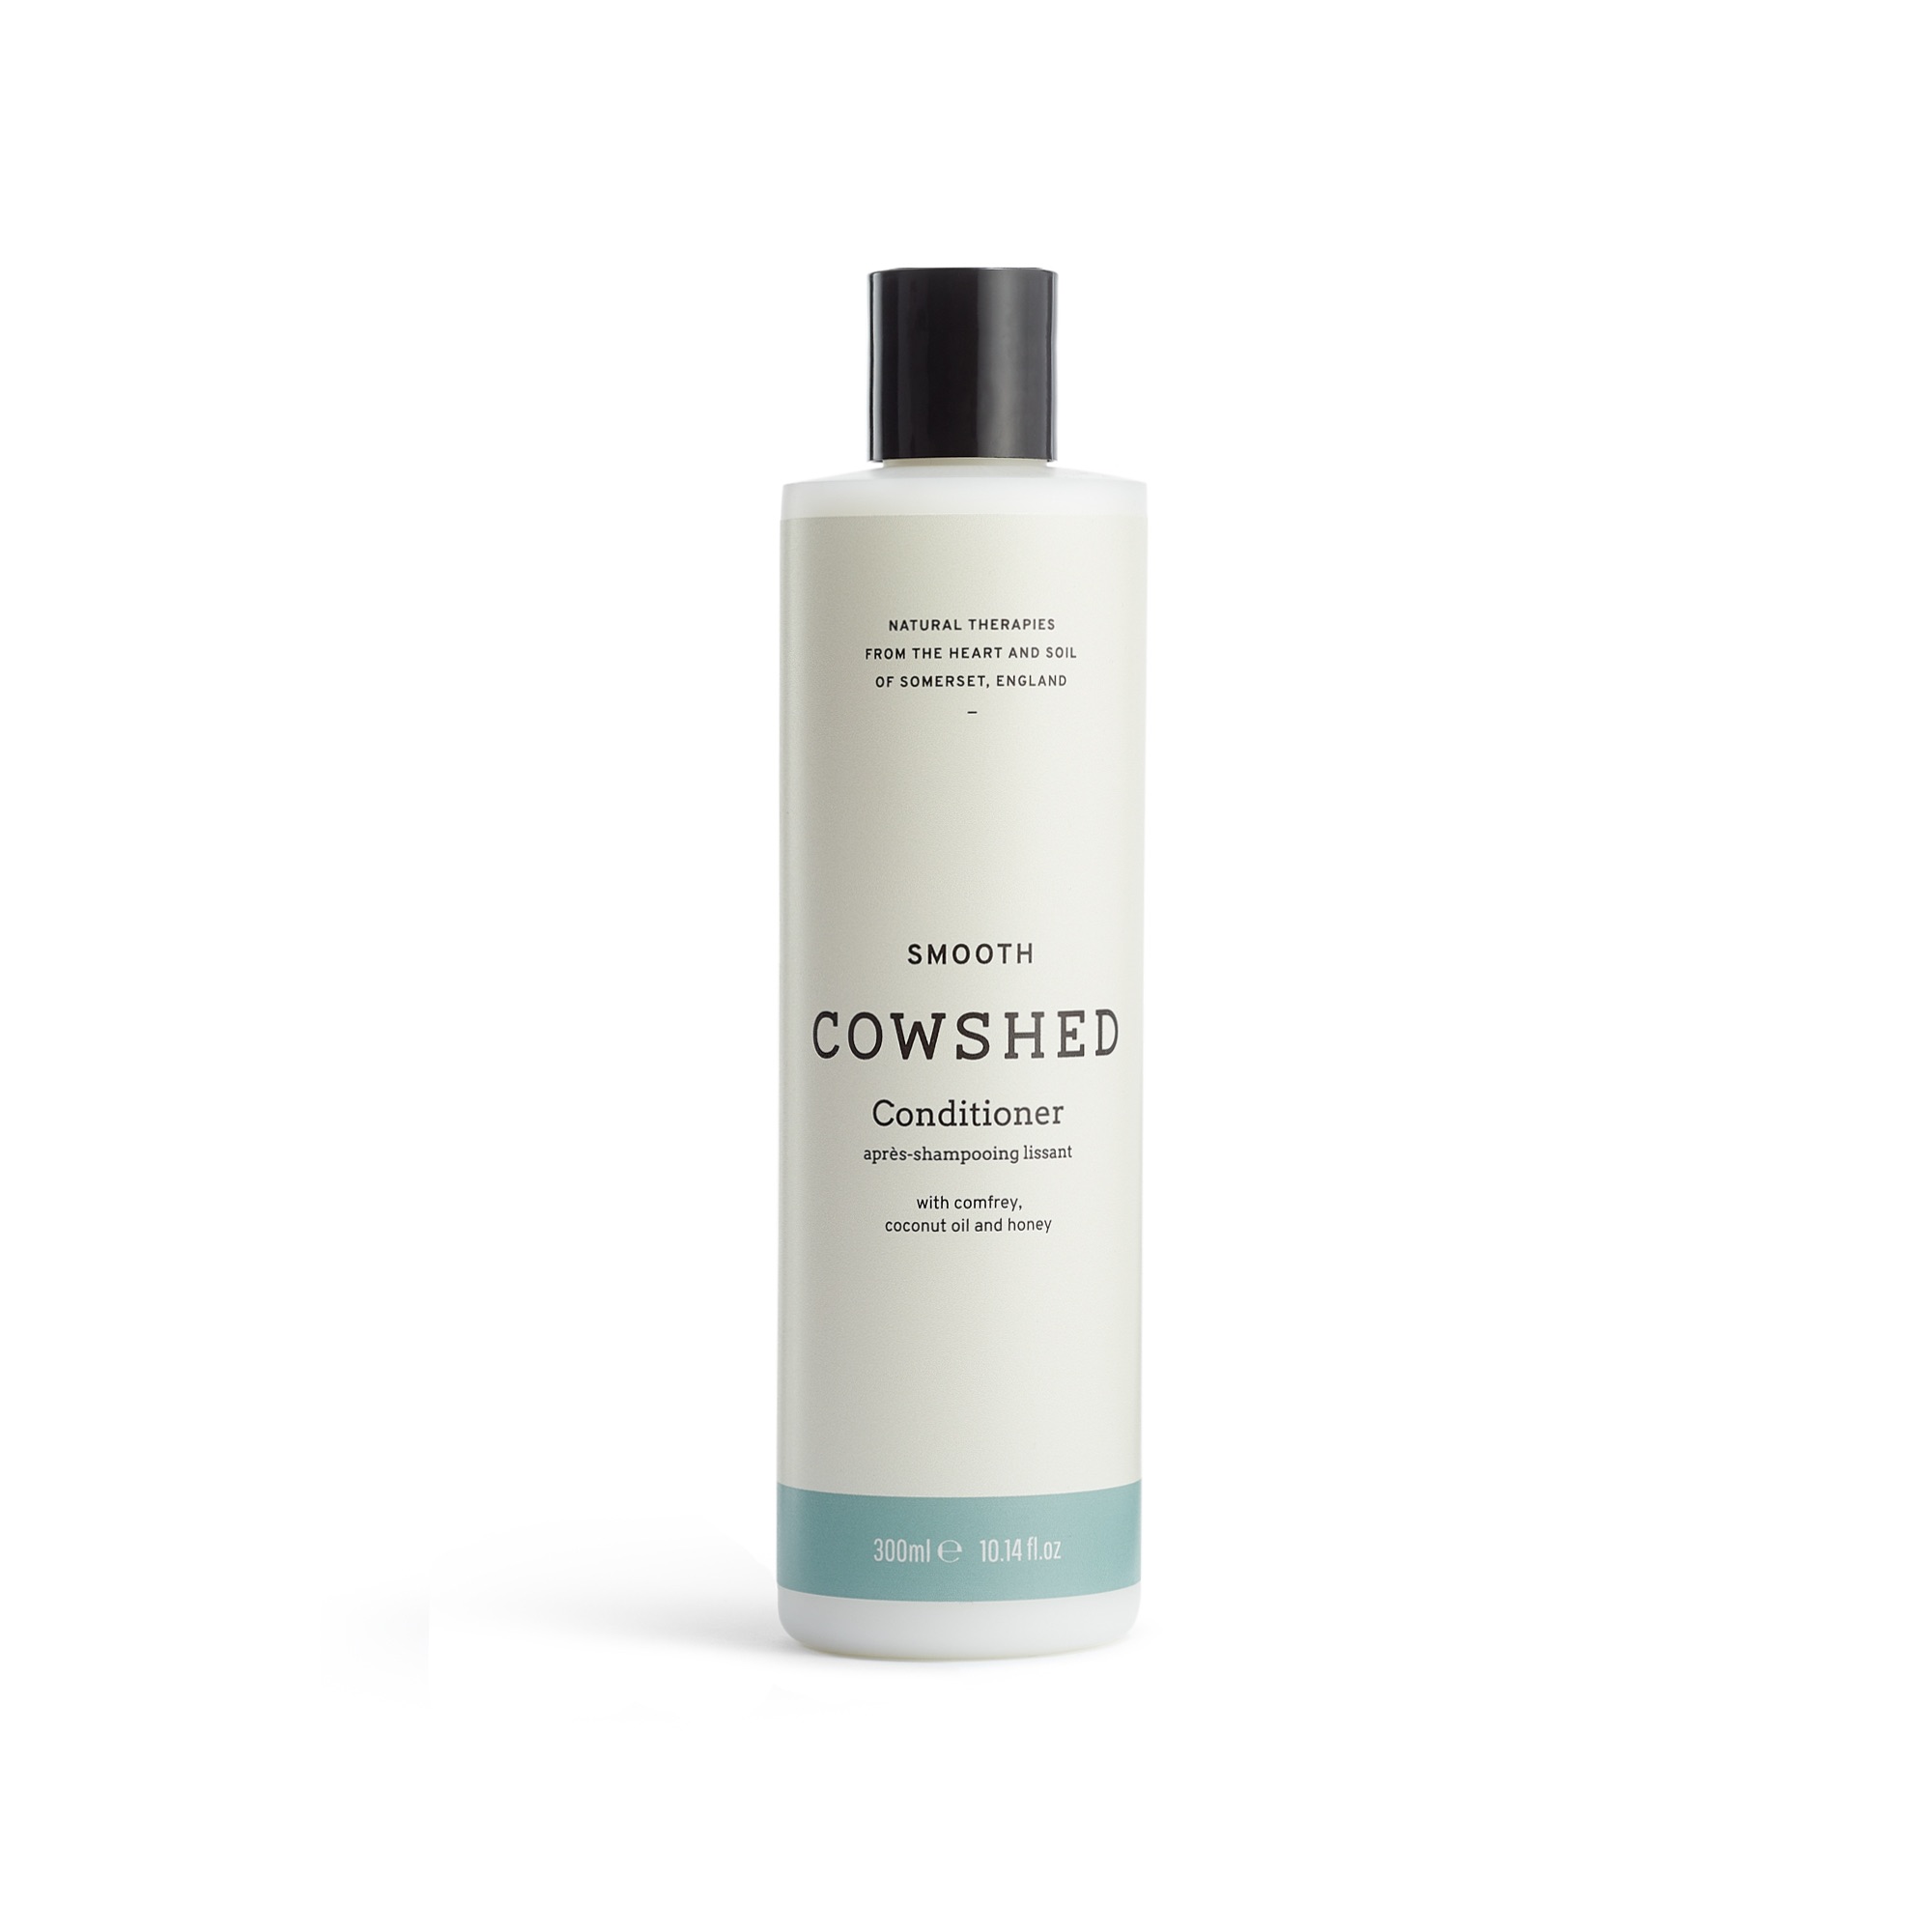 Cowshed SMOOTH Conditioner (Knackered Cow Smoothing Conditioner) 300ml